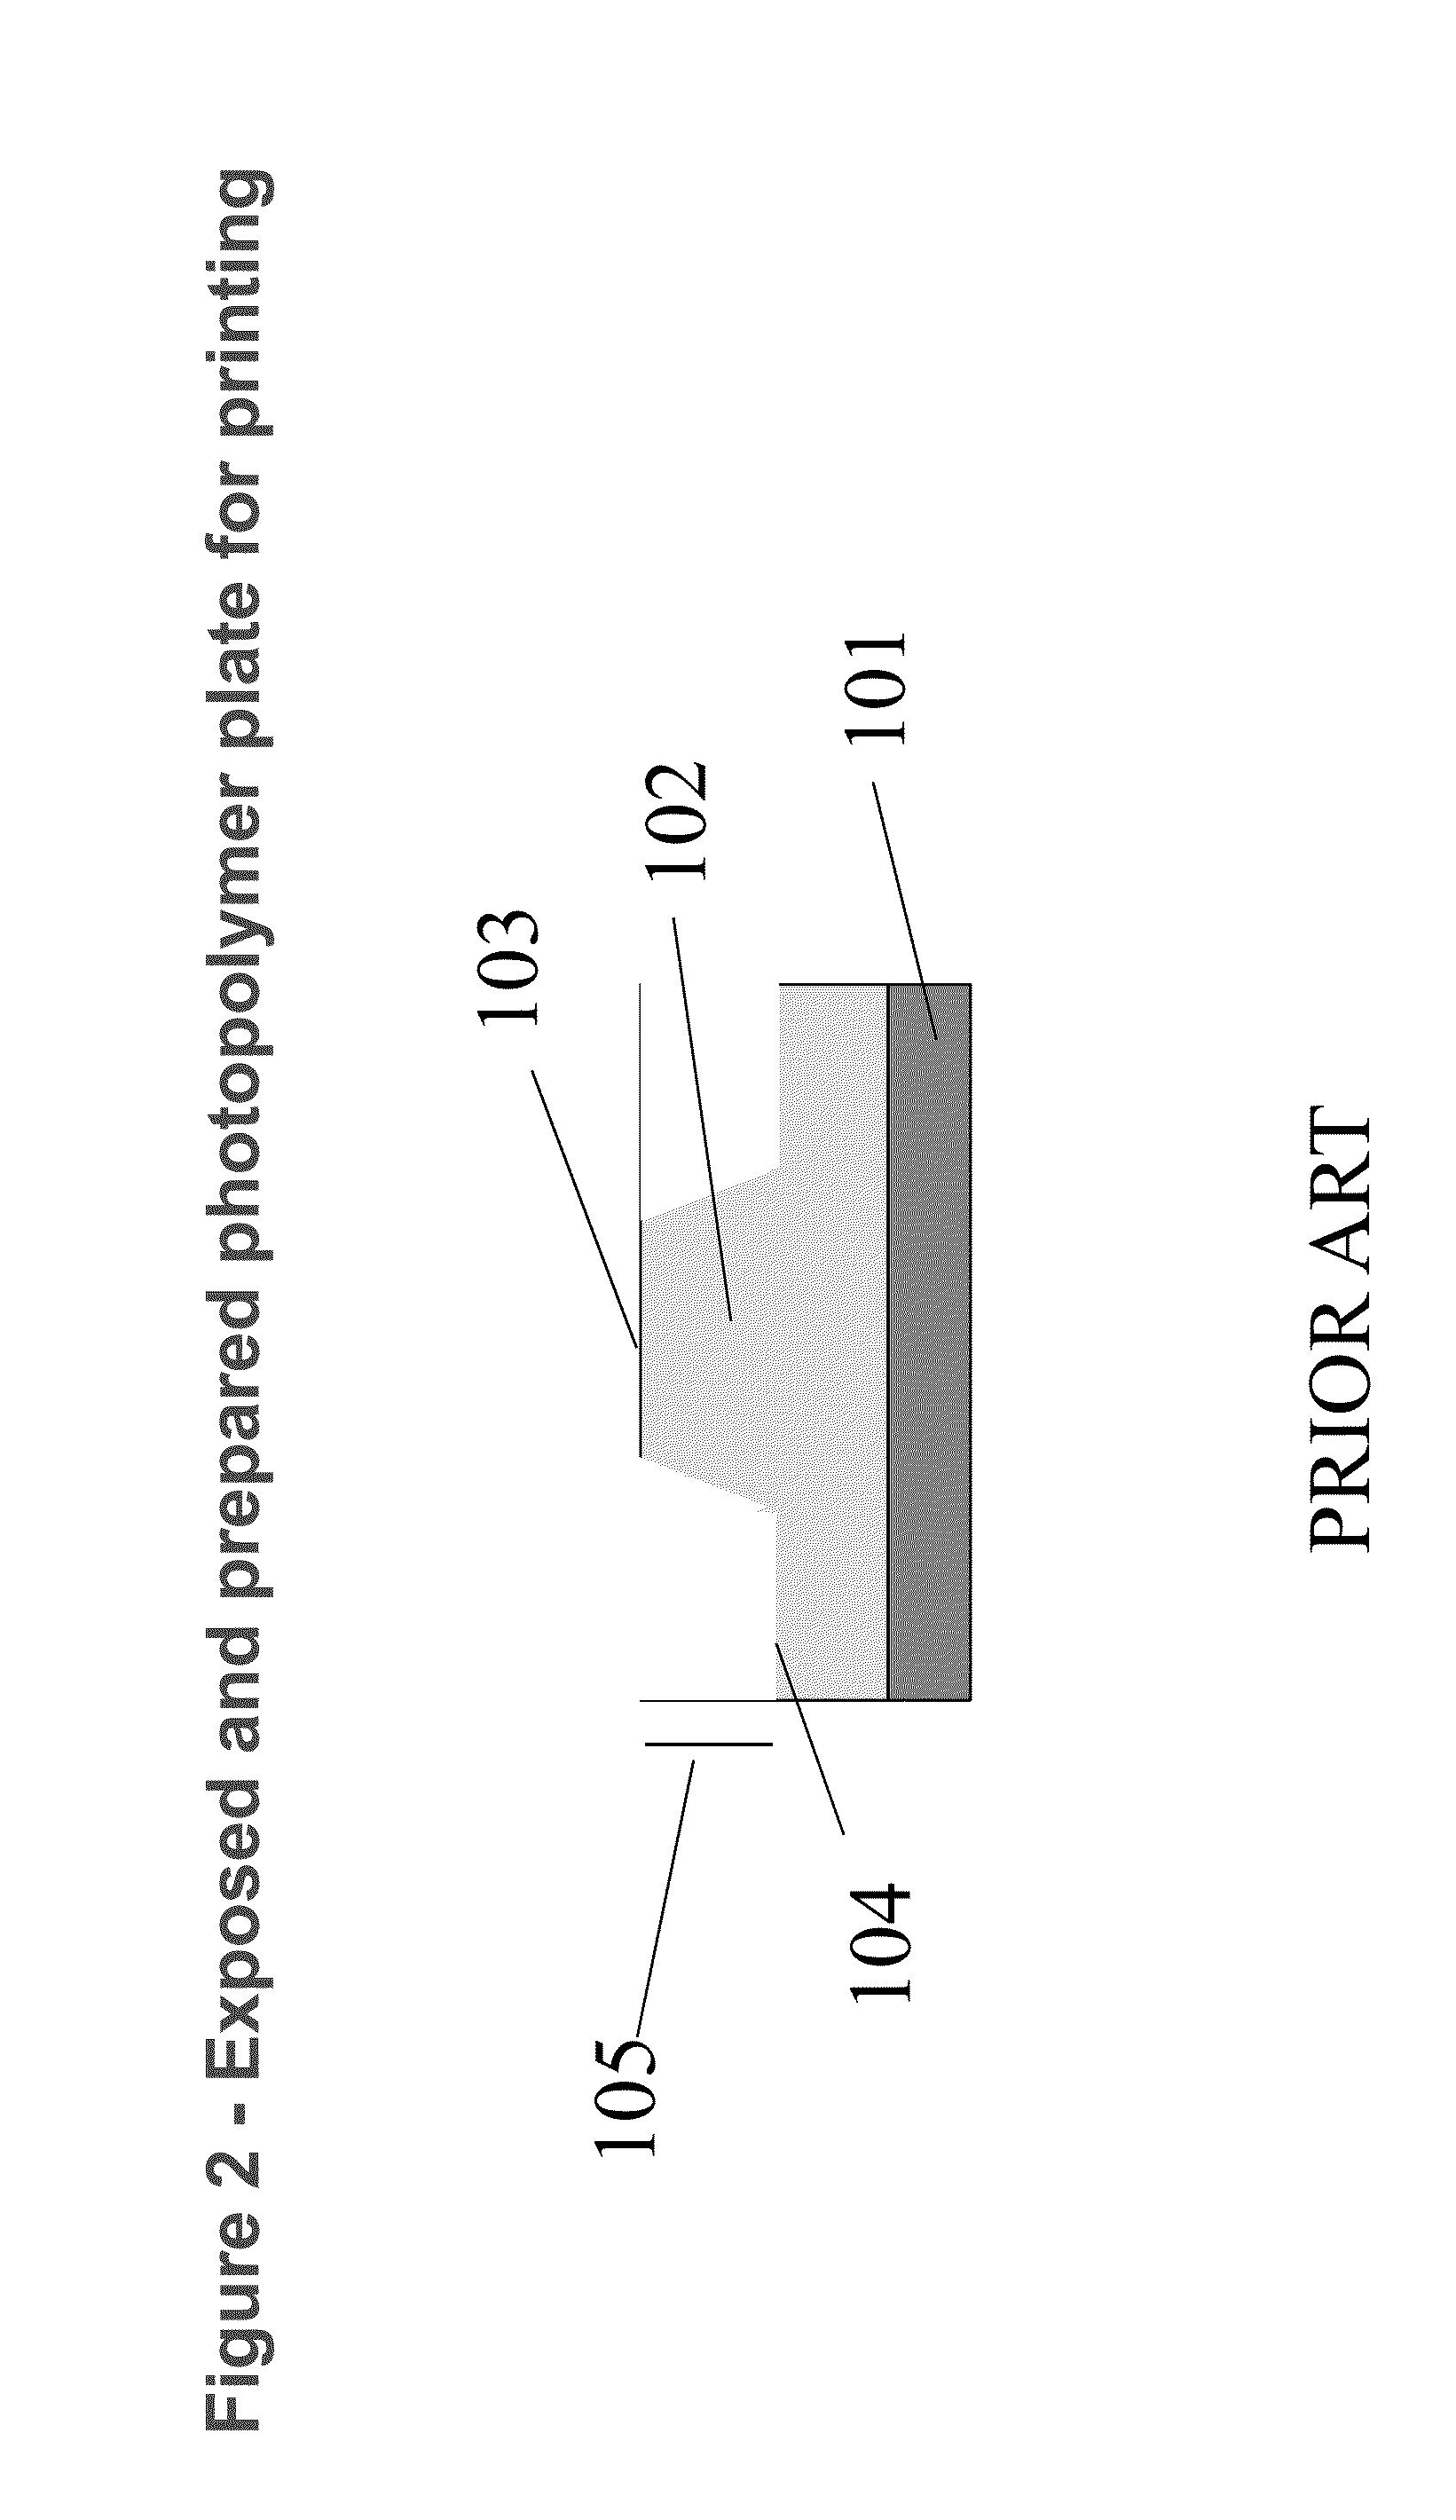 System for forming security markings using structured microdots